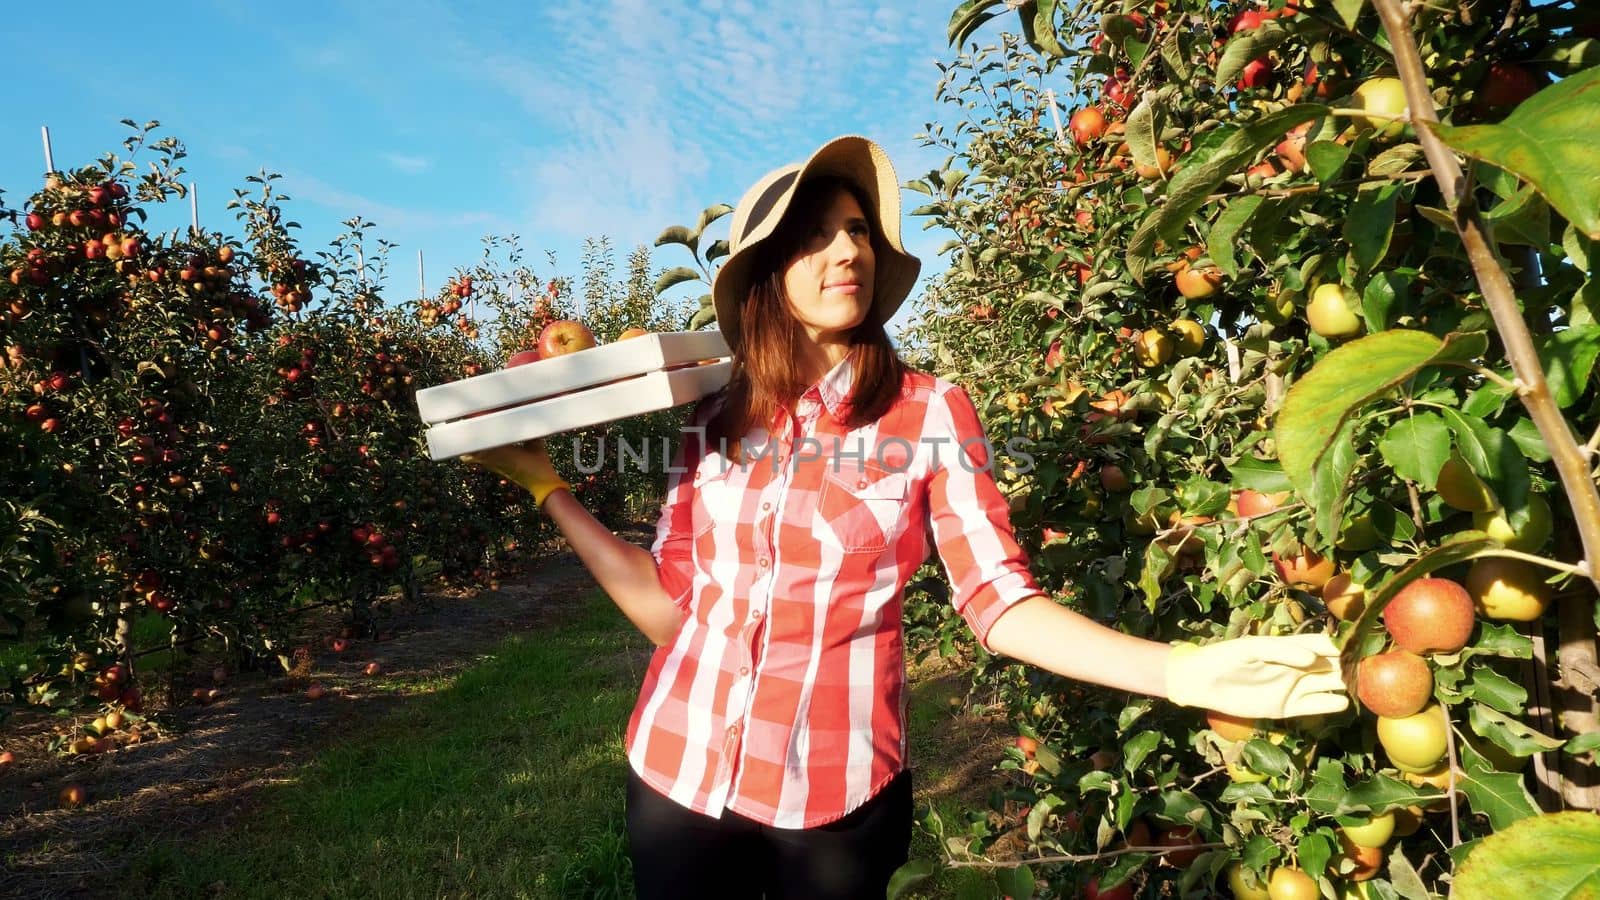 in the sun's rays, female farmer in plaid shirt and hat walks between the rows of apple trees. she holds box with fresh juicy, selective apples. red apple harvest in the garden, on the farm. High quality photo